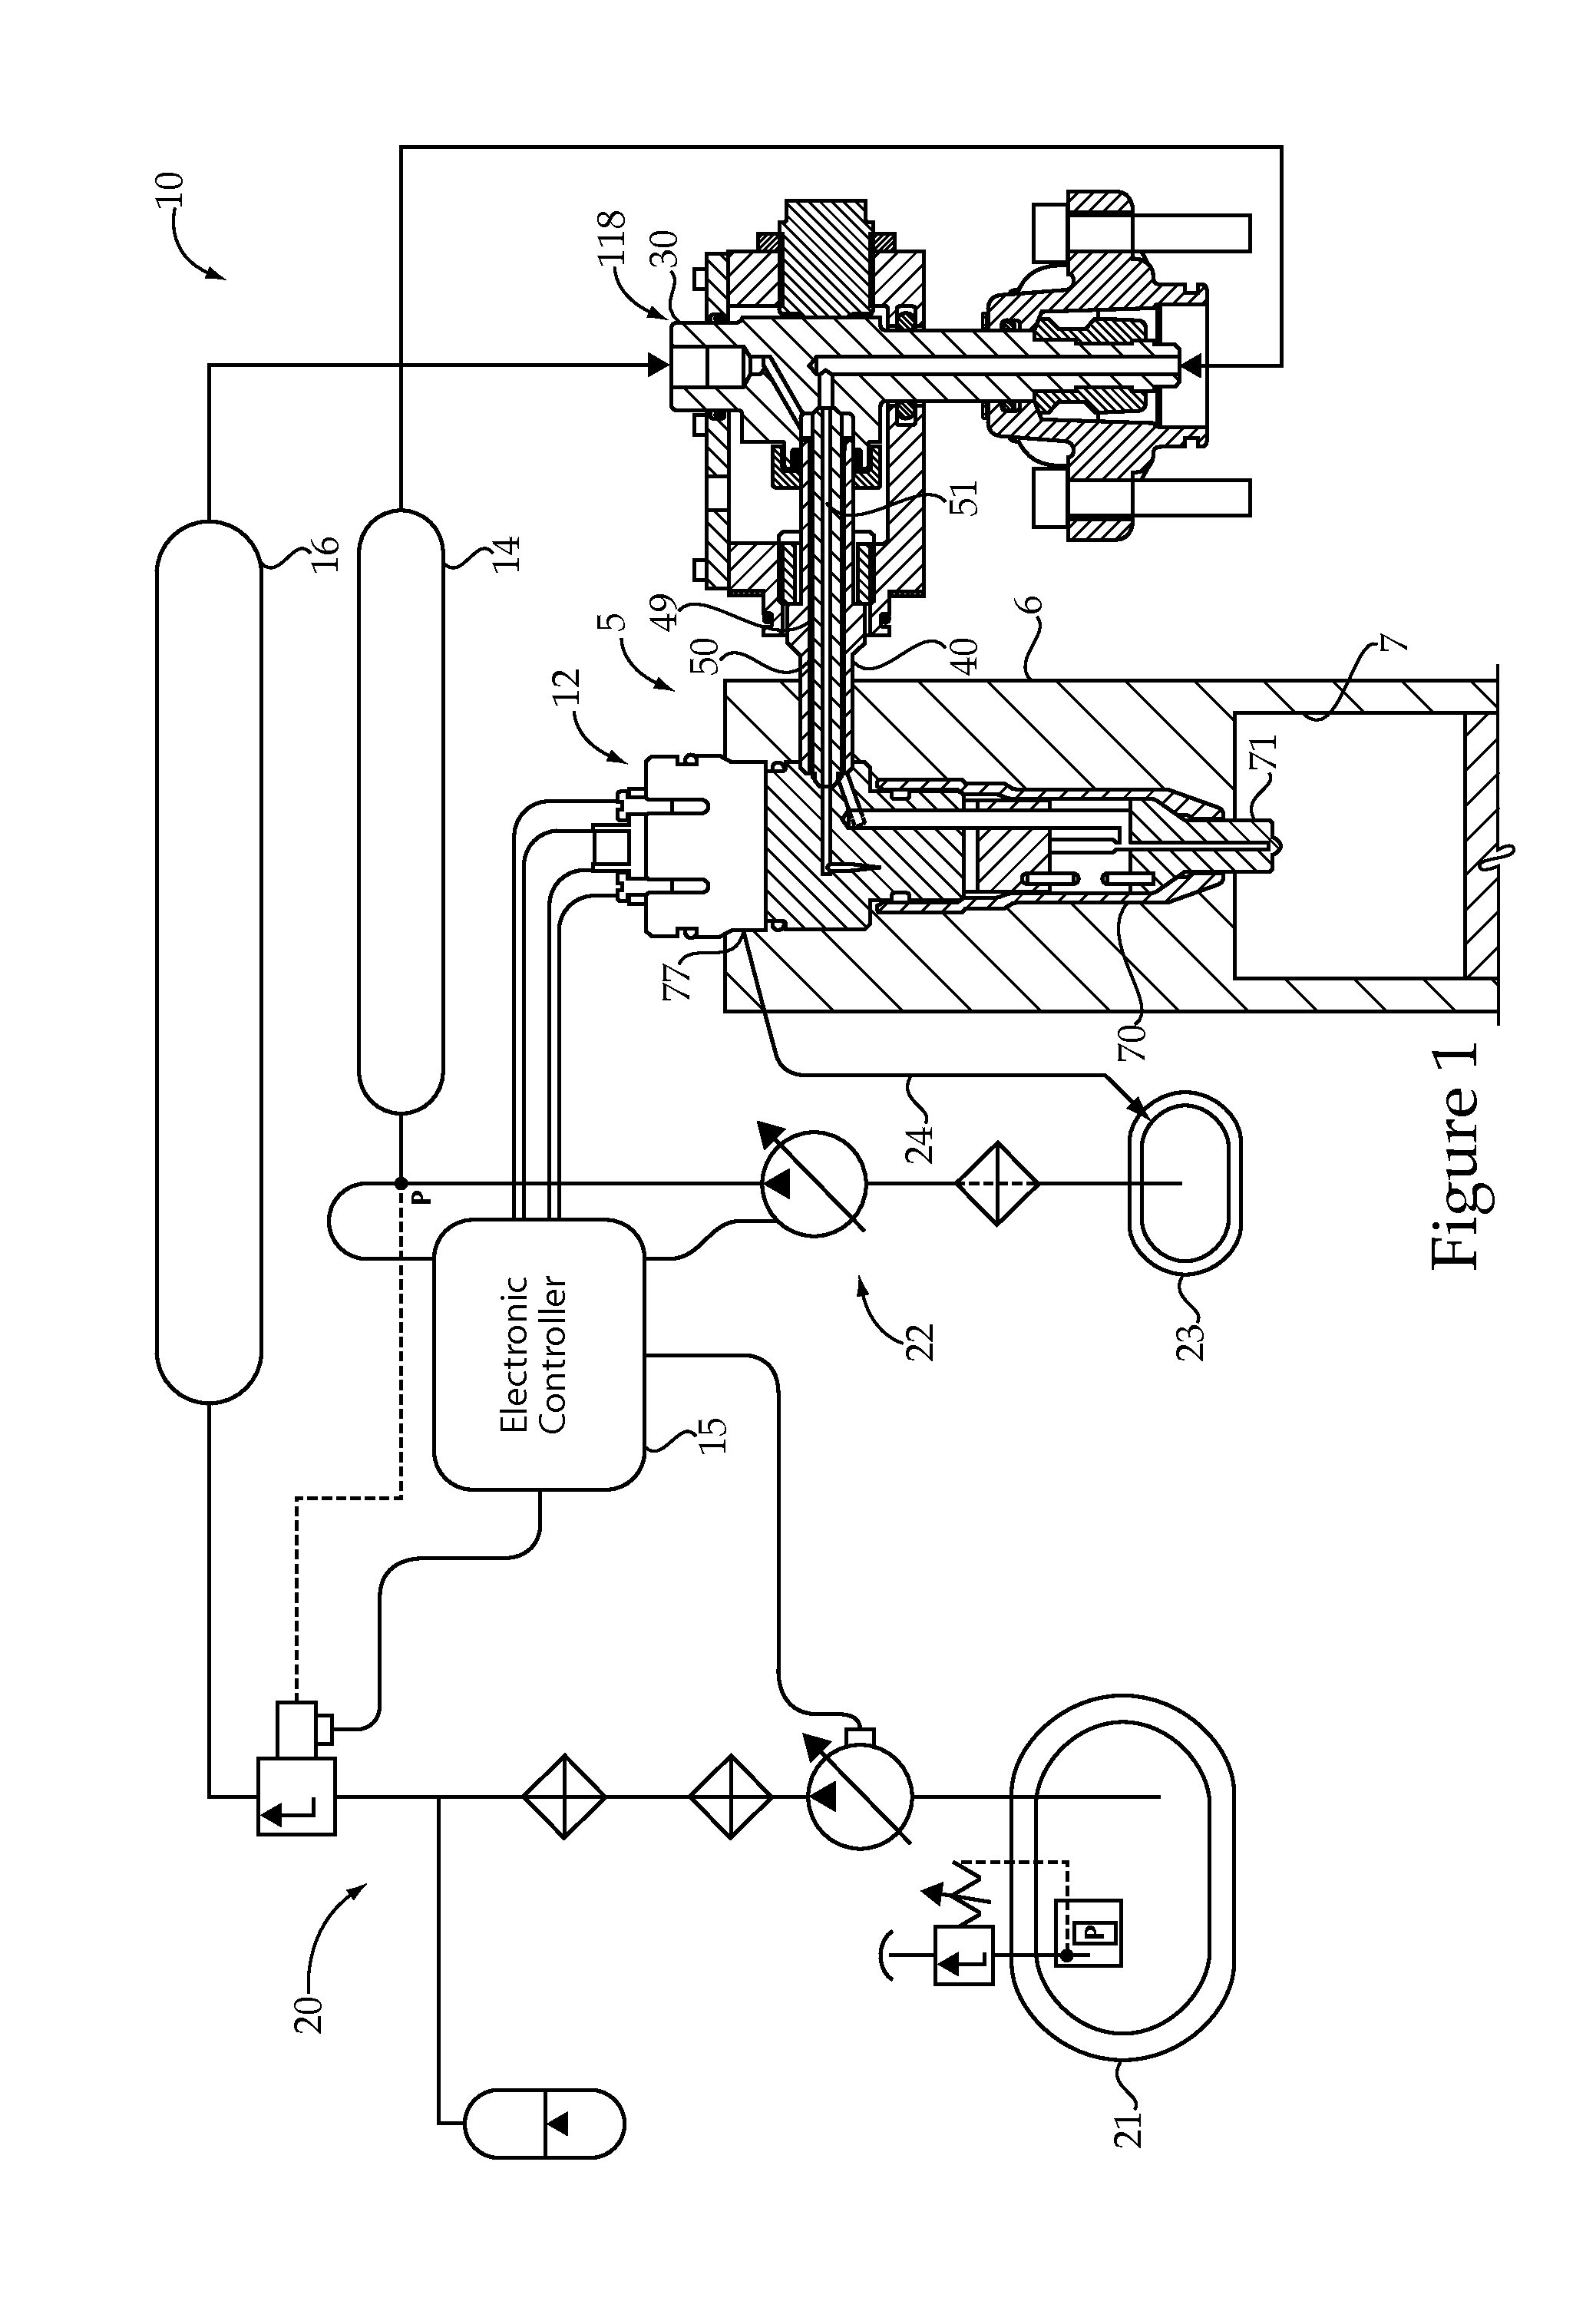 Dual Fuel Injection Compression Ignition Engine And Method Of Operating Same